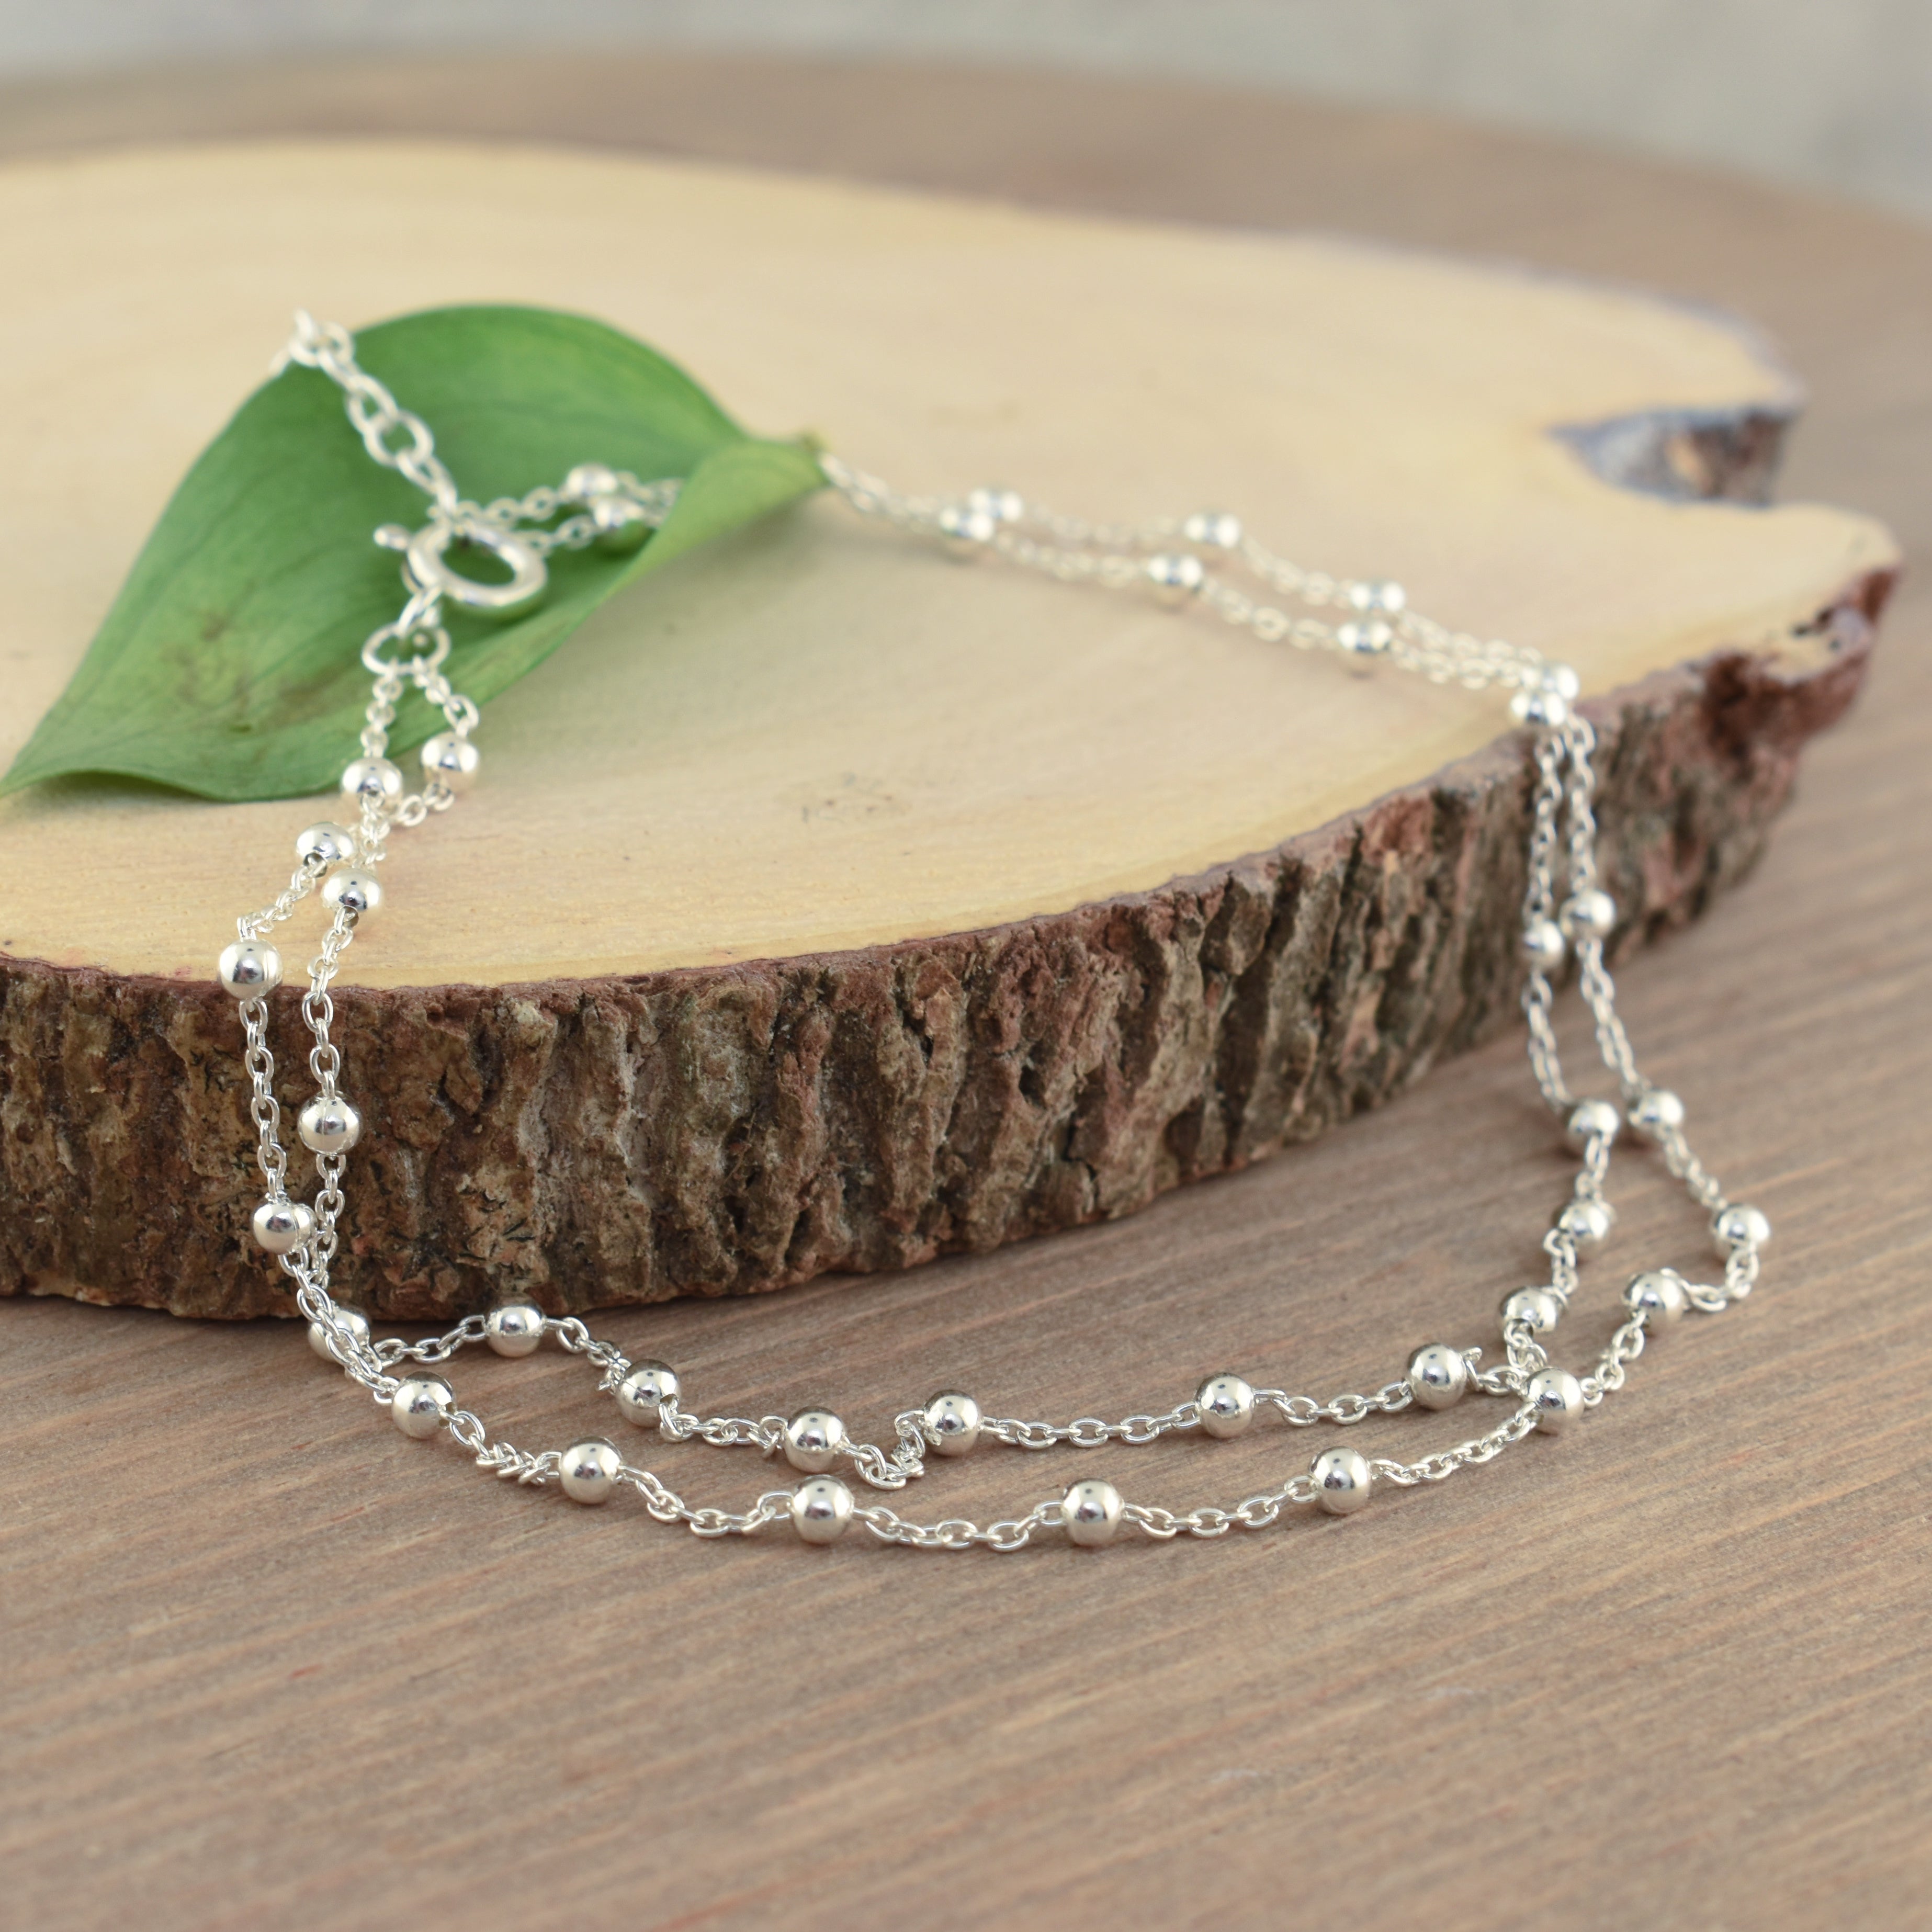 .925 sterling silver anklet with round beads